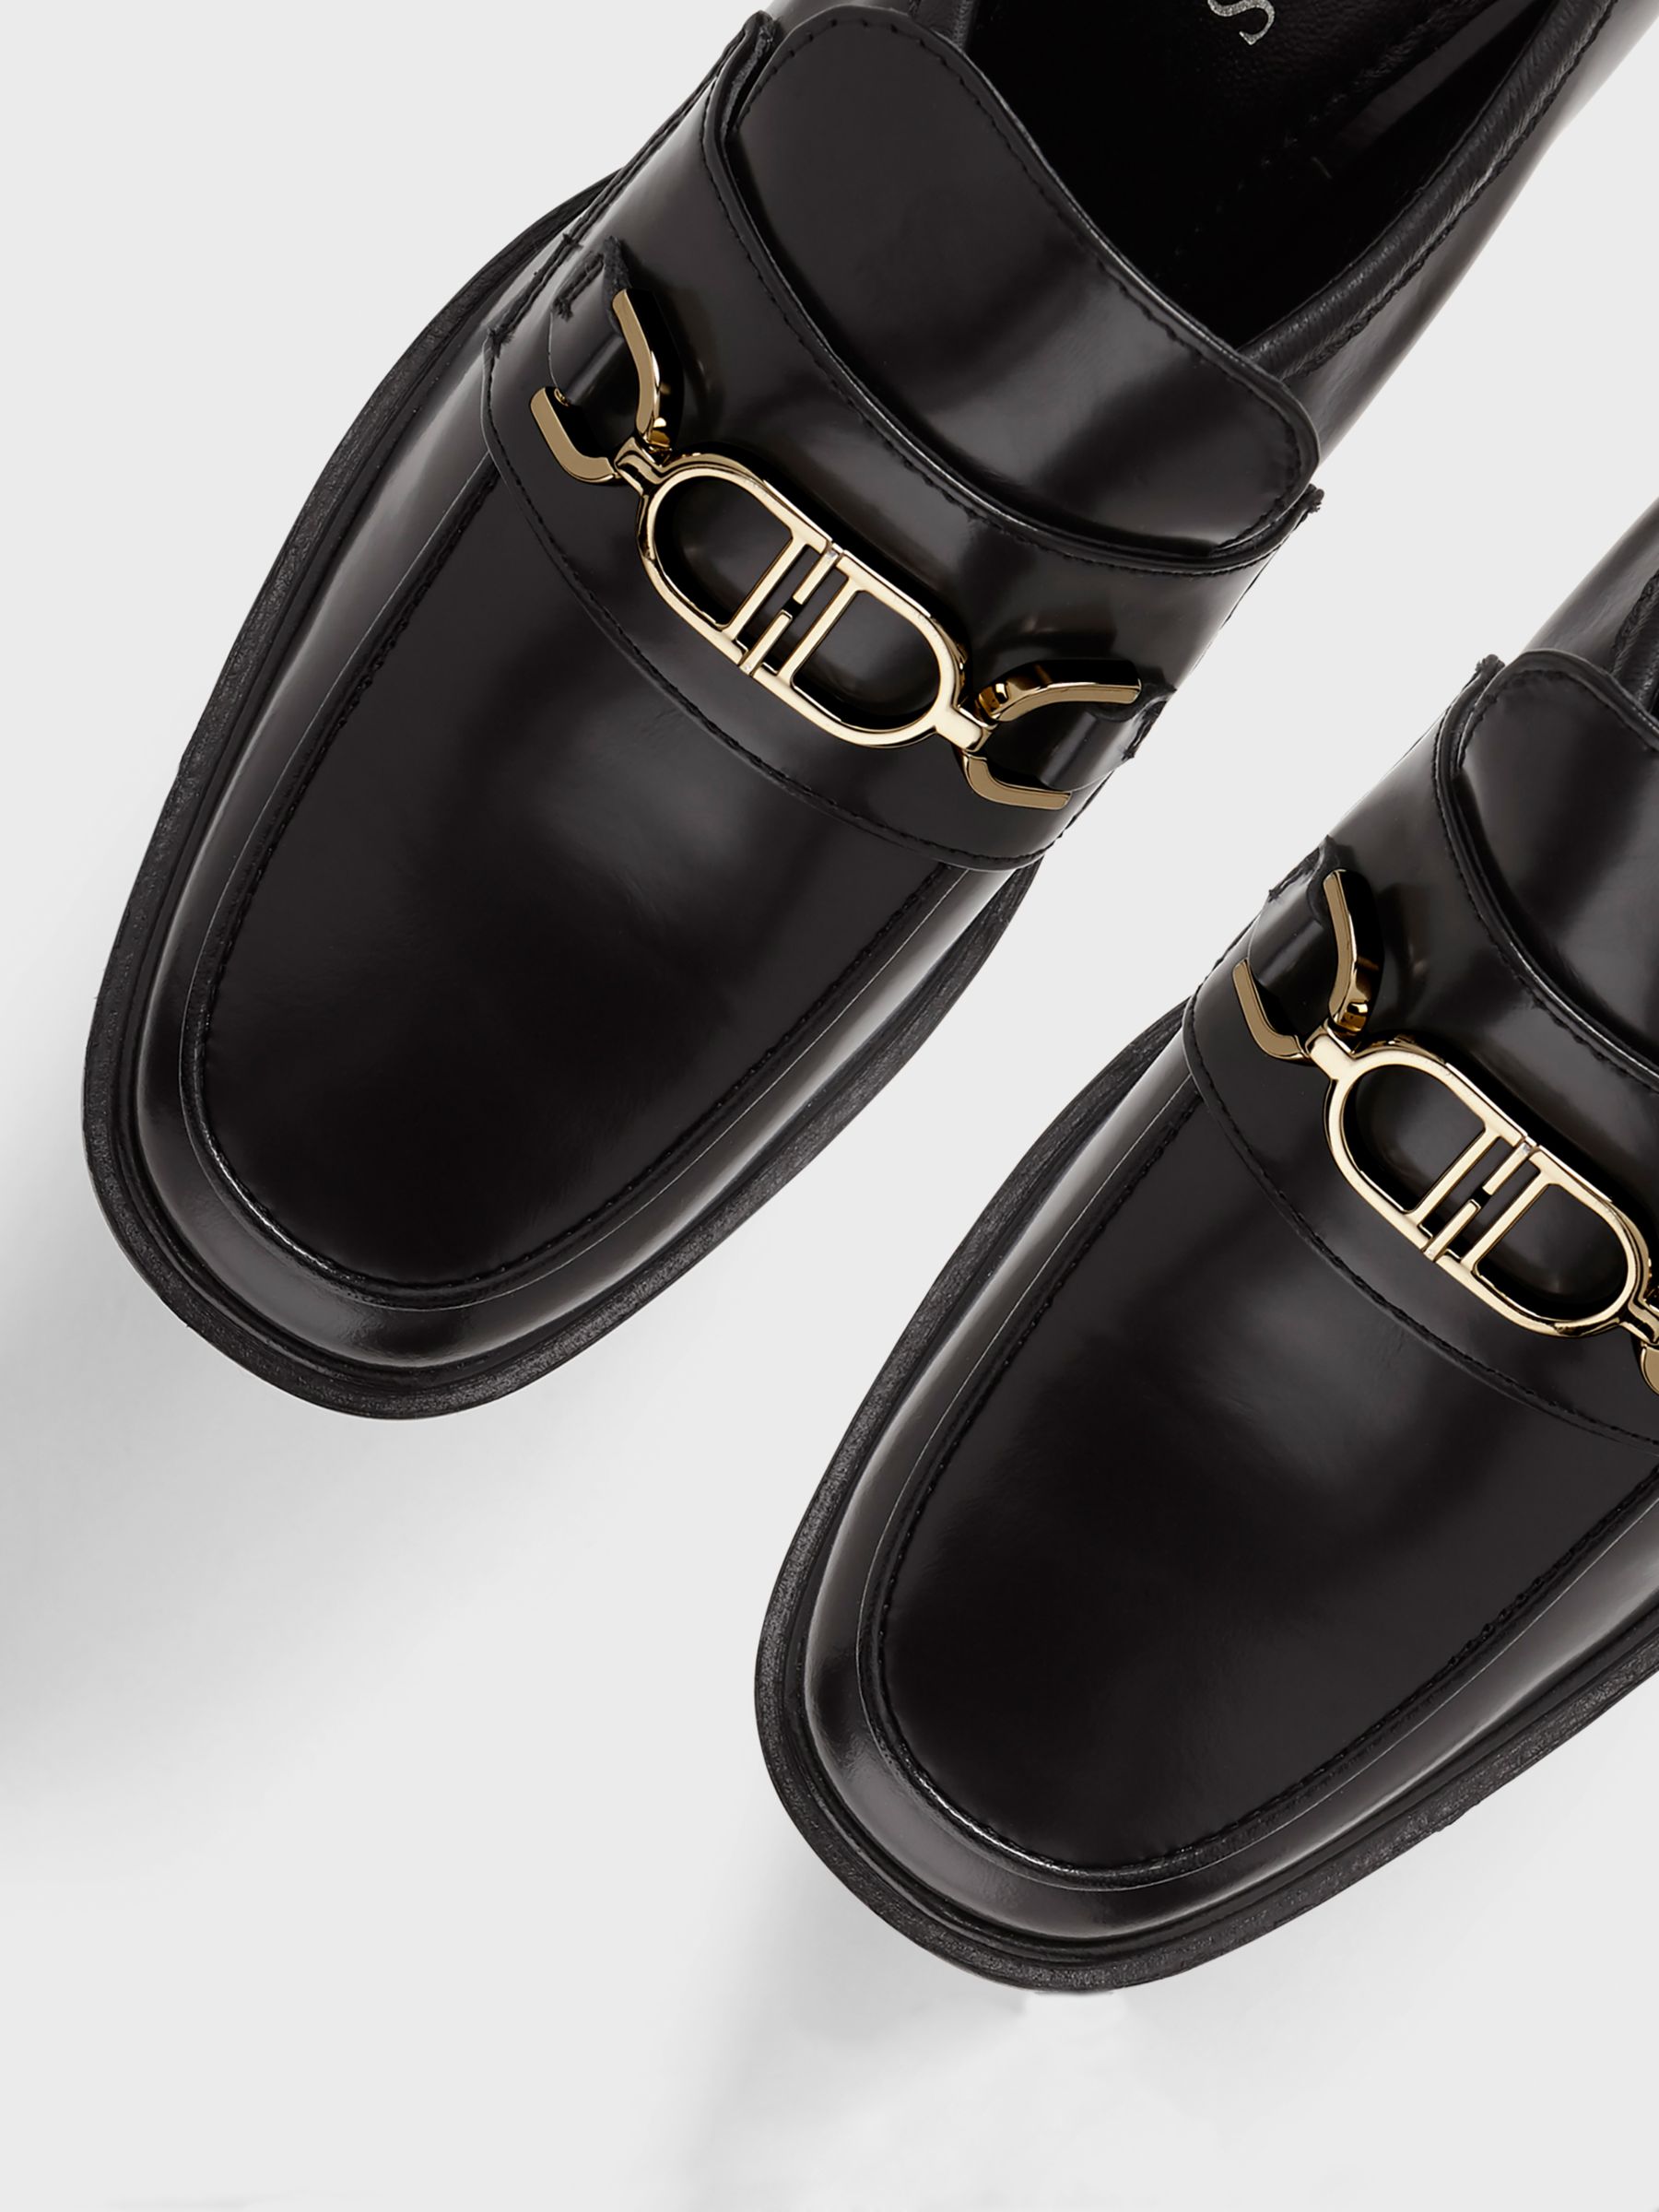 Hobbs Laura Leather Heeled Loafers, Black at John Lewis & Partners